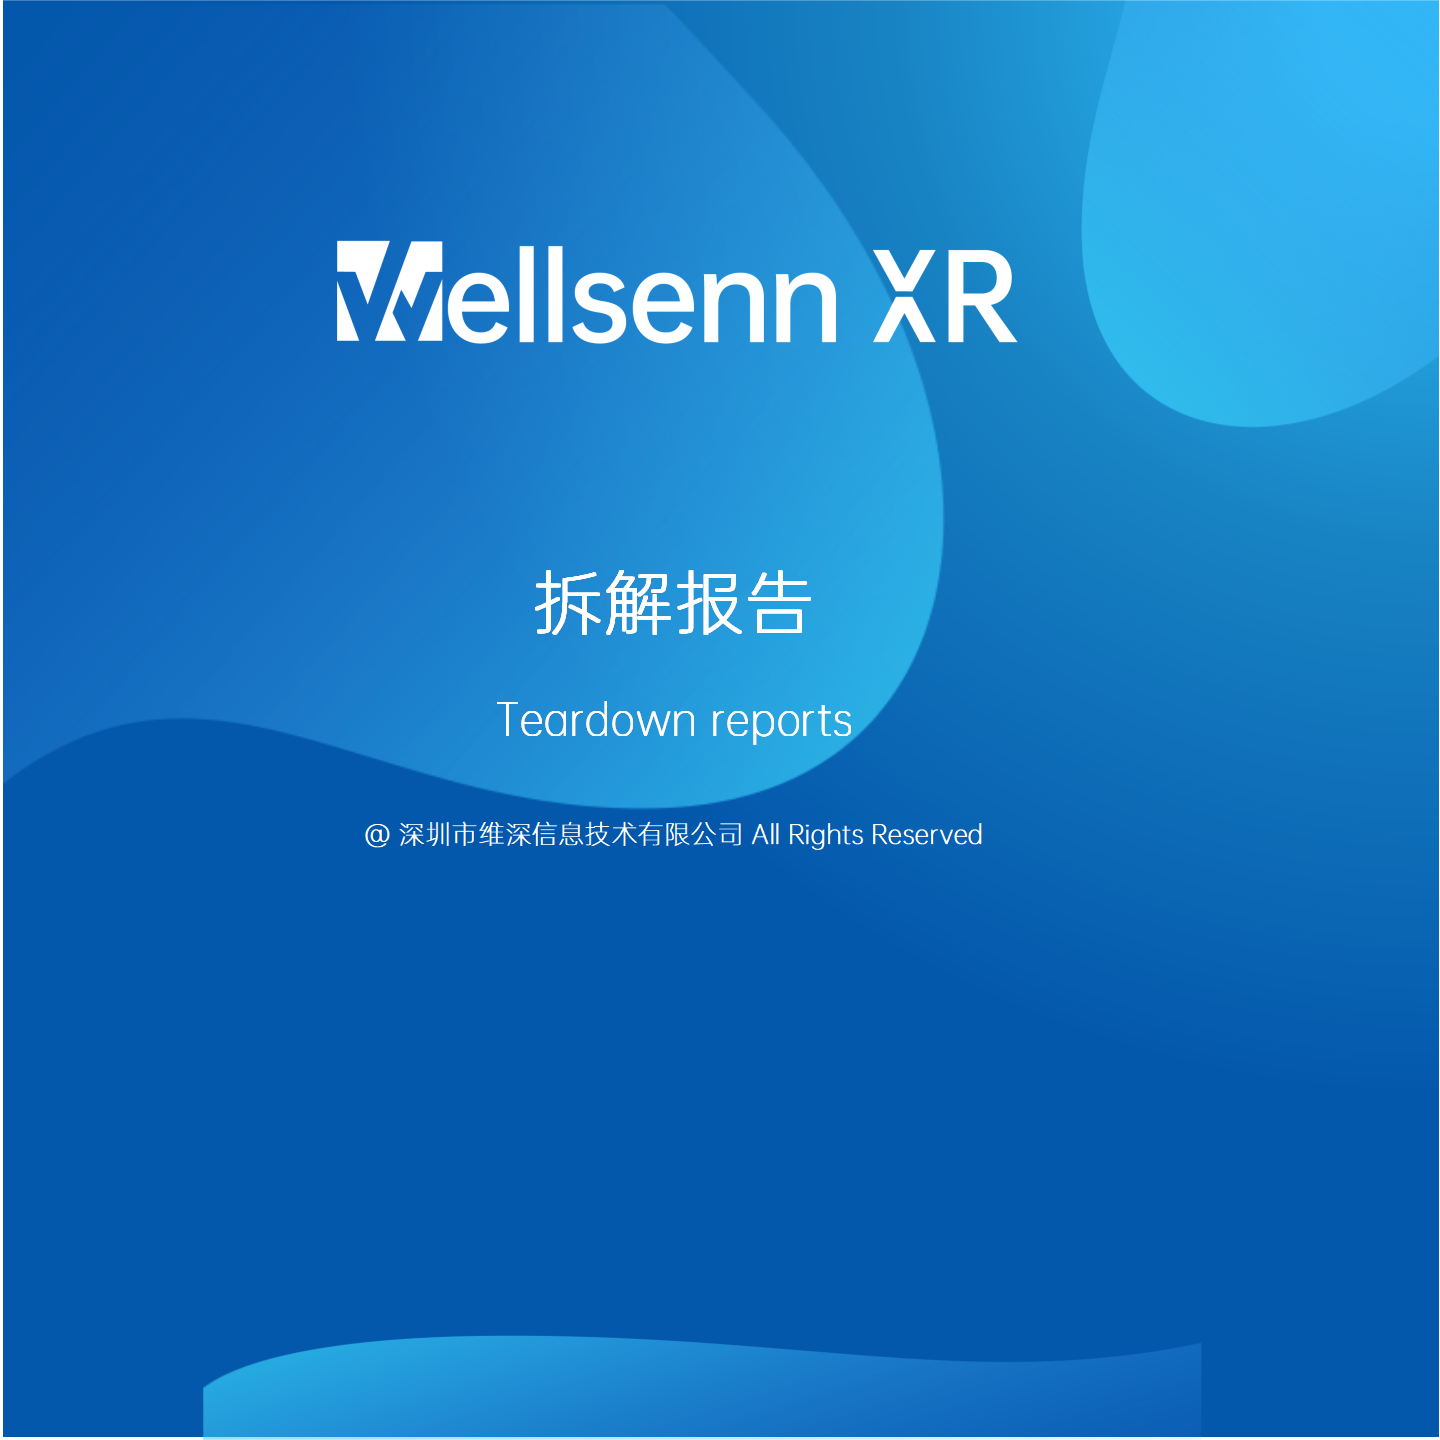 The teardown report is based on the disassembly of popular XR products in the current period, and is presented in the form of a report after analyst analysis